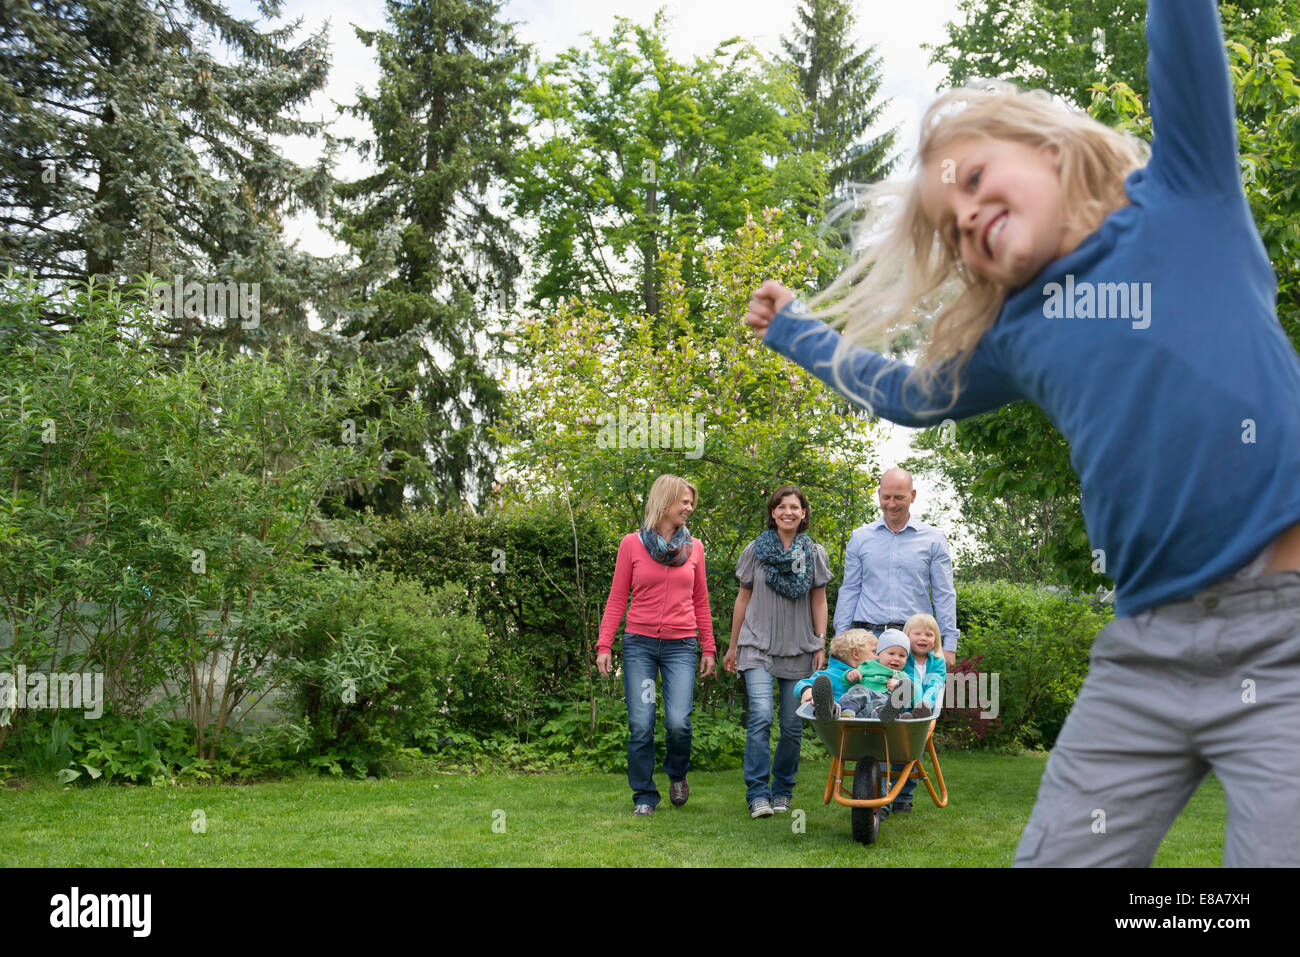 Young family playing in garden with wheelbarrow Stock Photo